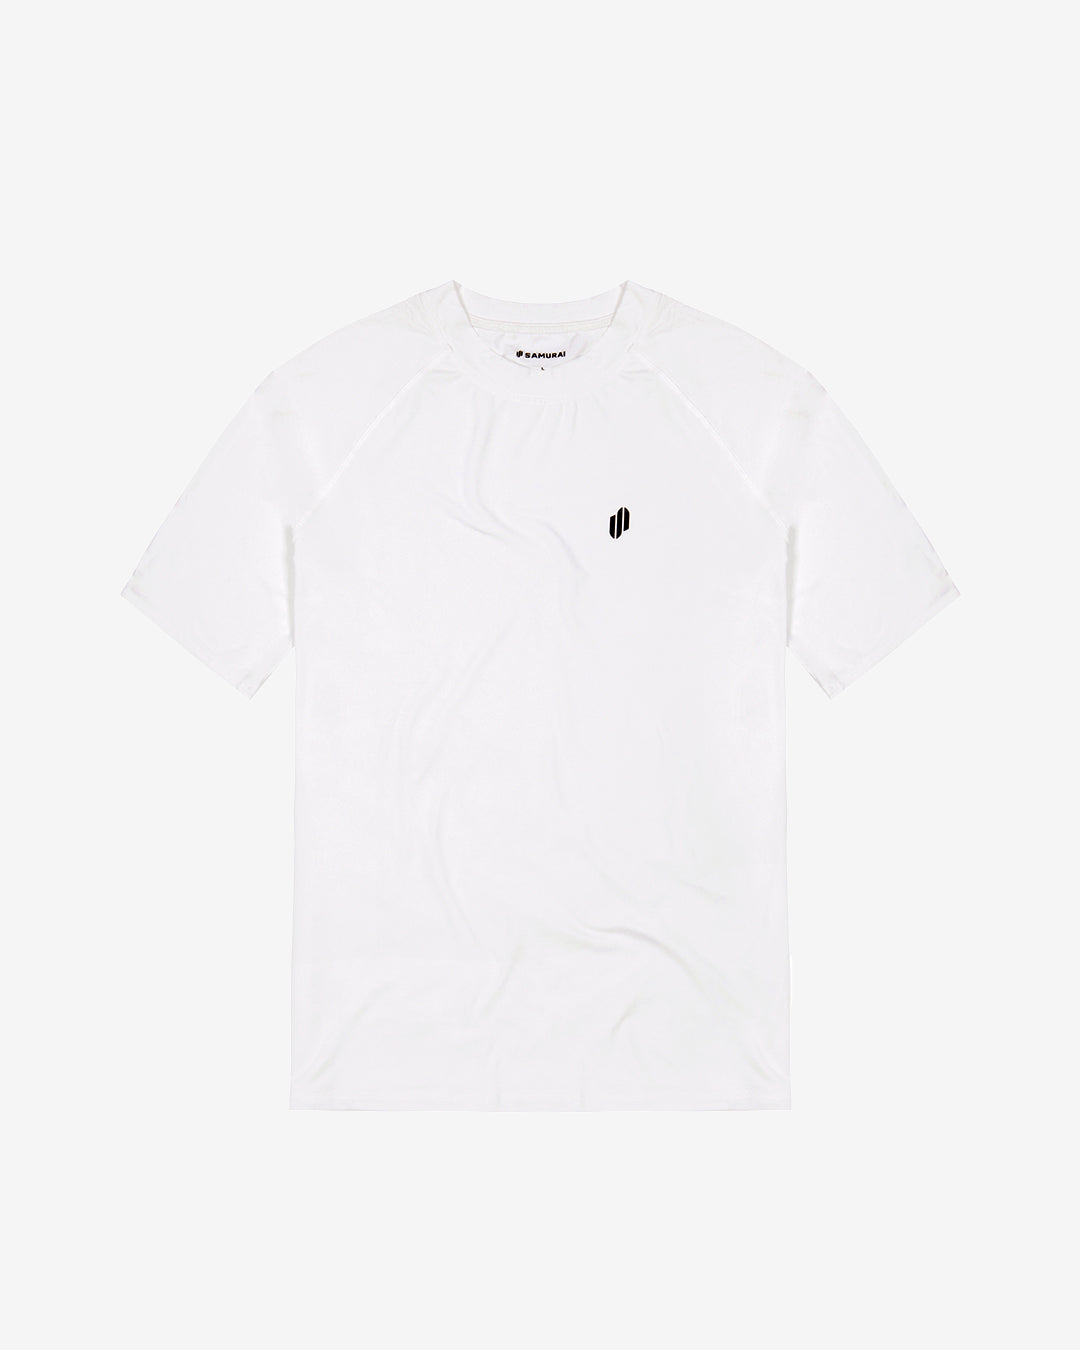 EE:S05 - Soft Touch T-Shirt - White